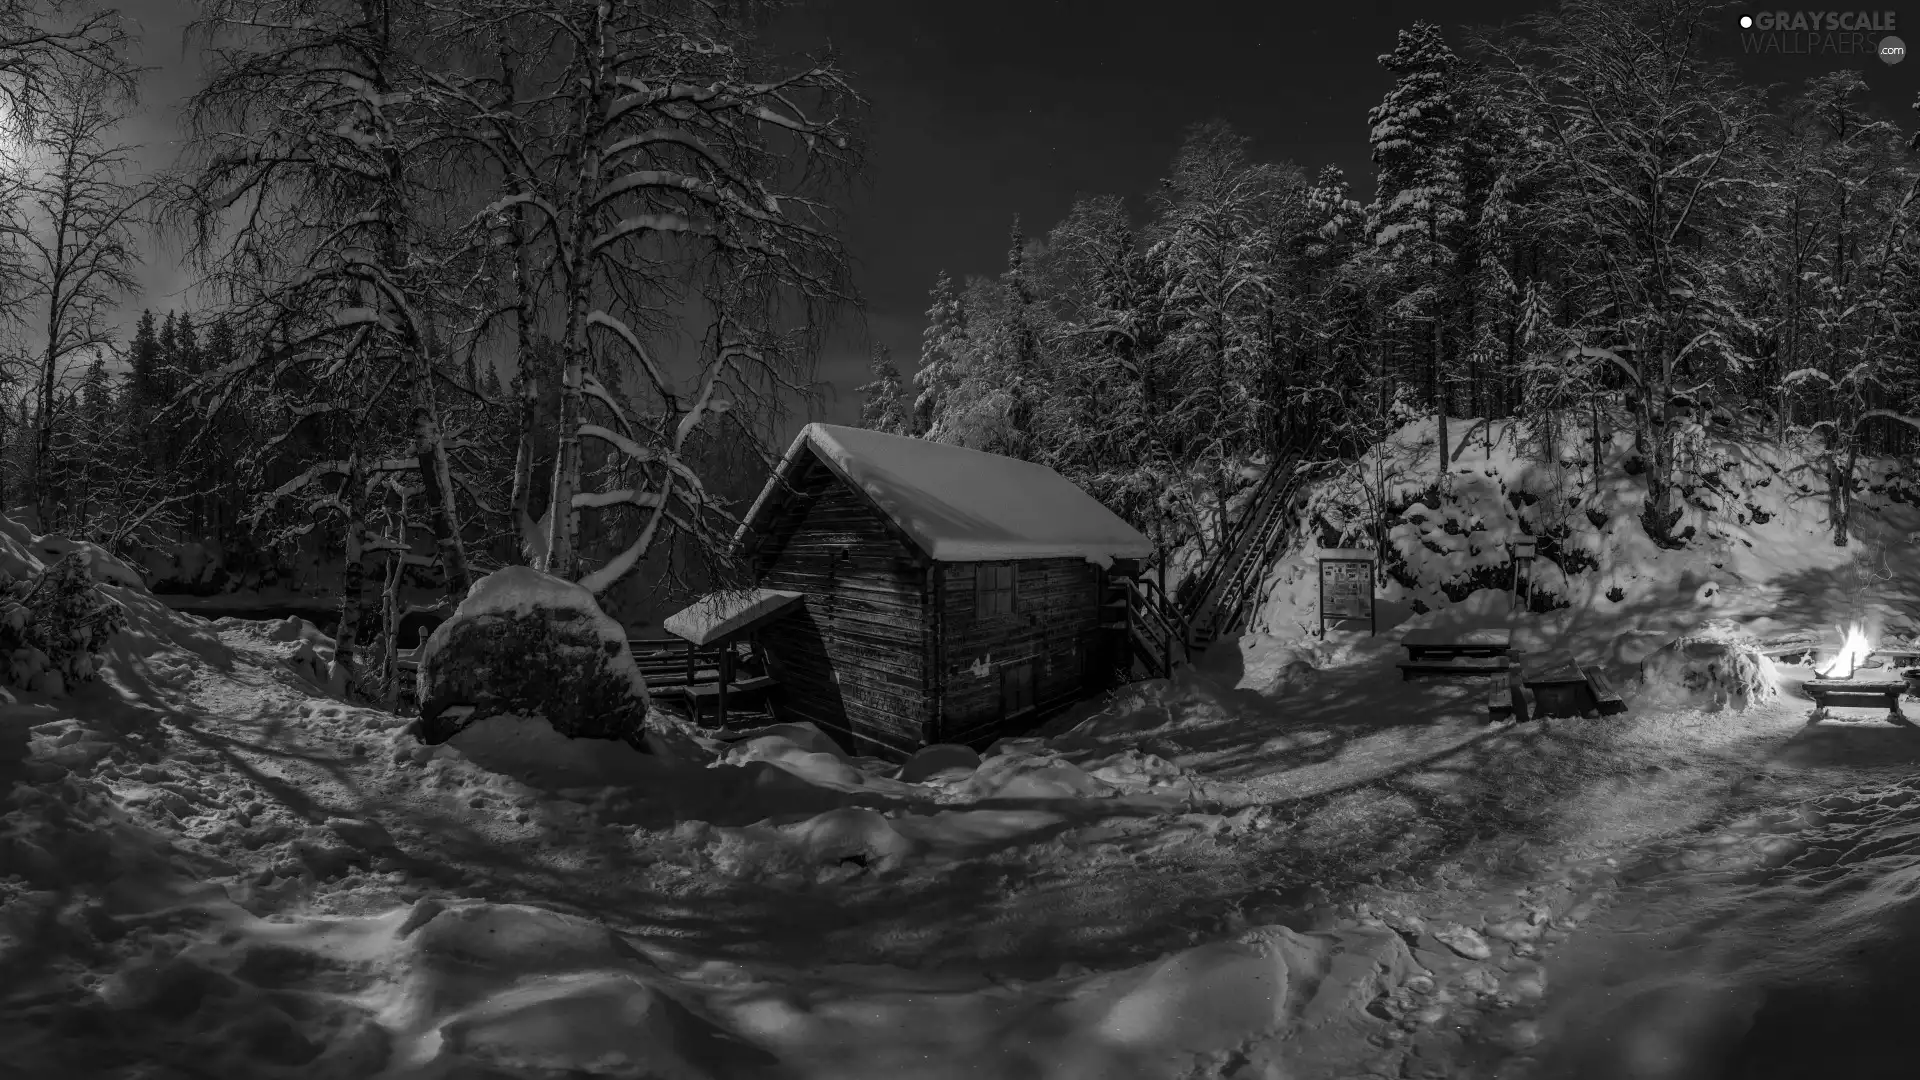 wooden, Oulanka National Park, Myllykoski Mill, viewes, trees, Lapland, fire, winter, Finland, Night, snow, forest